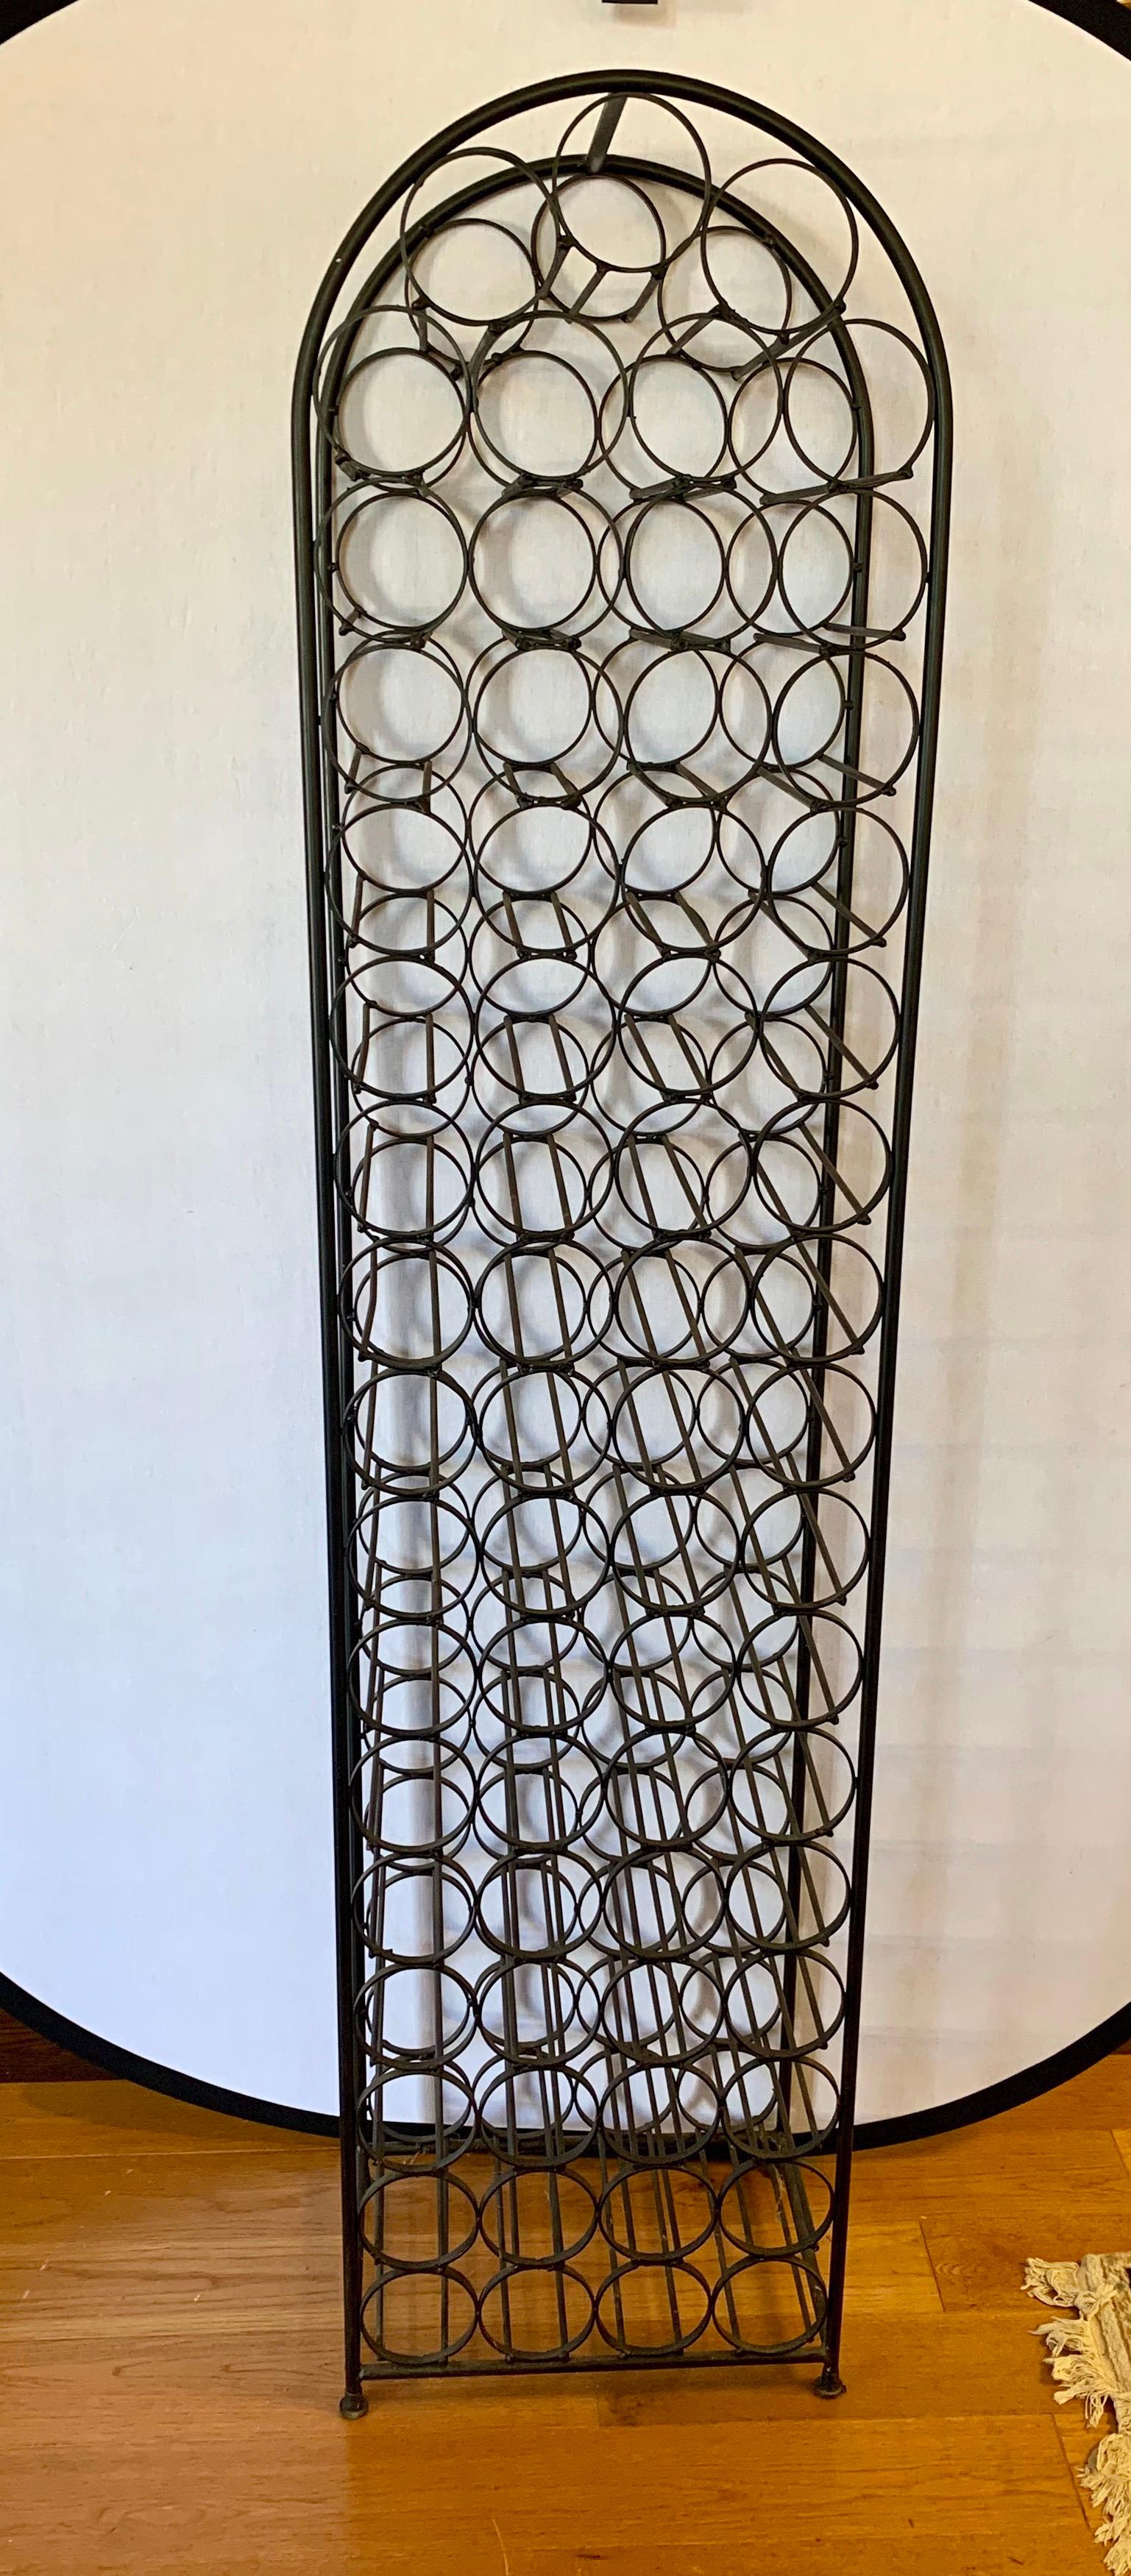 Vintage sixty seven bottle wine rack with semicircle top. Made of wrought iron.